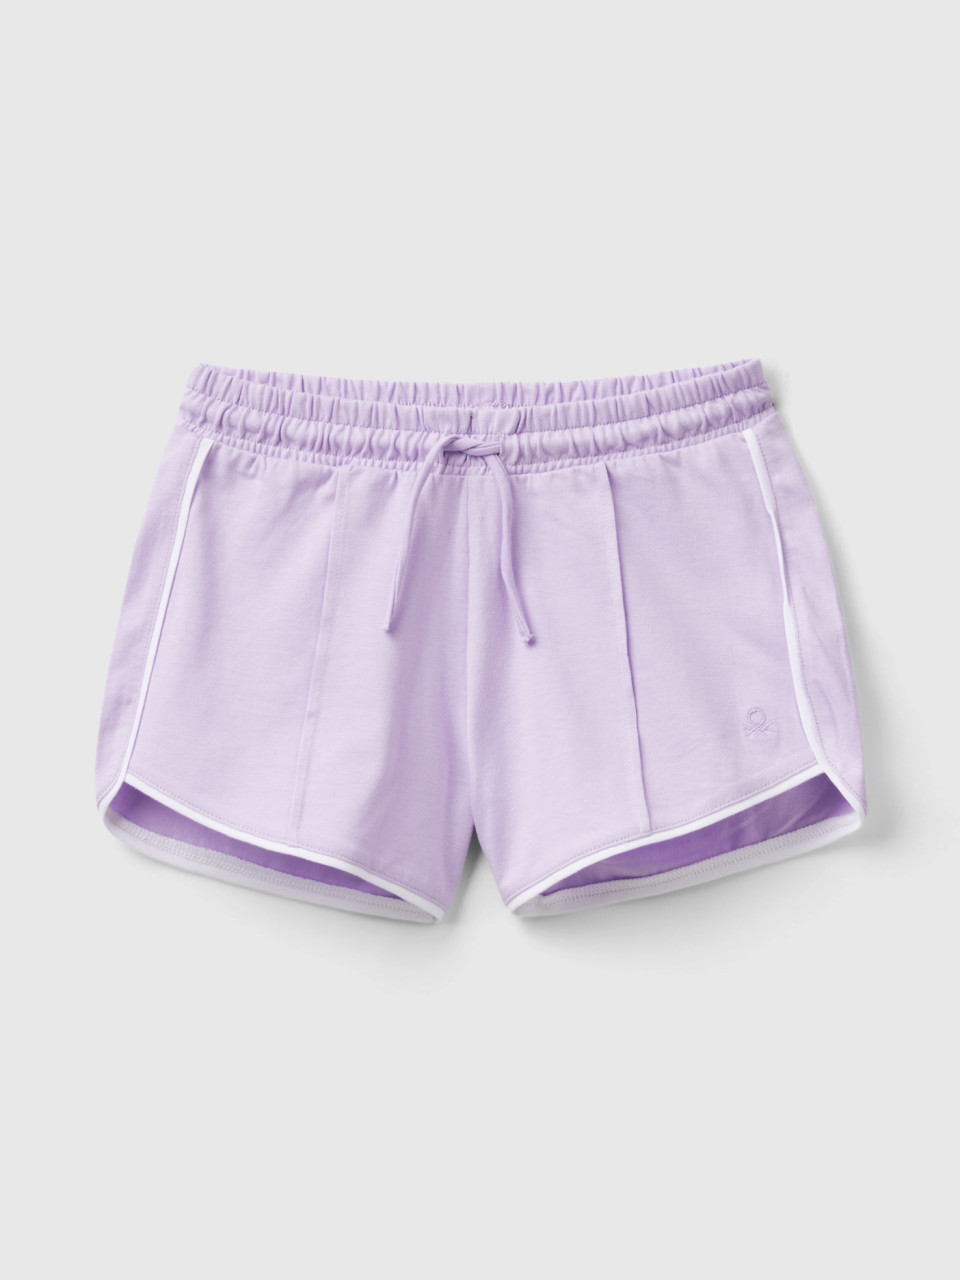 Benetton, 100% Cotton Shorts With Drawstring, Lilac, Kids